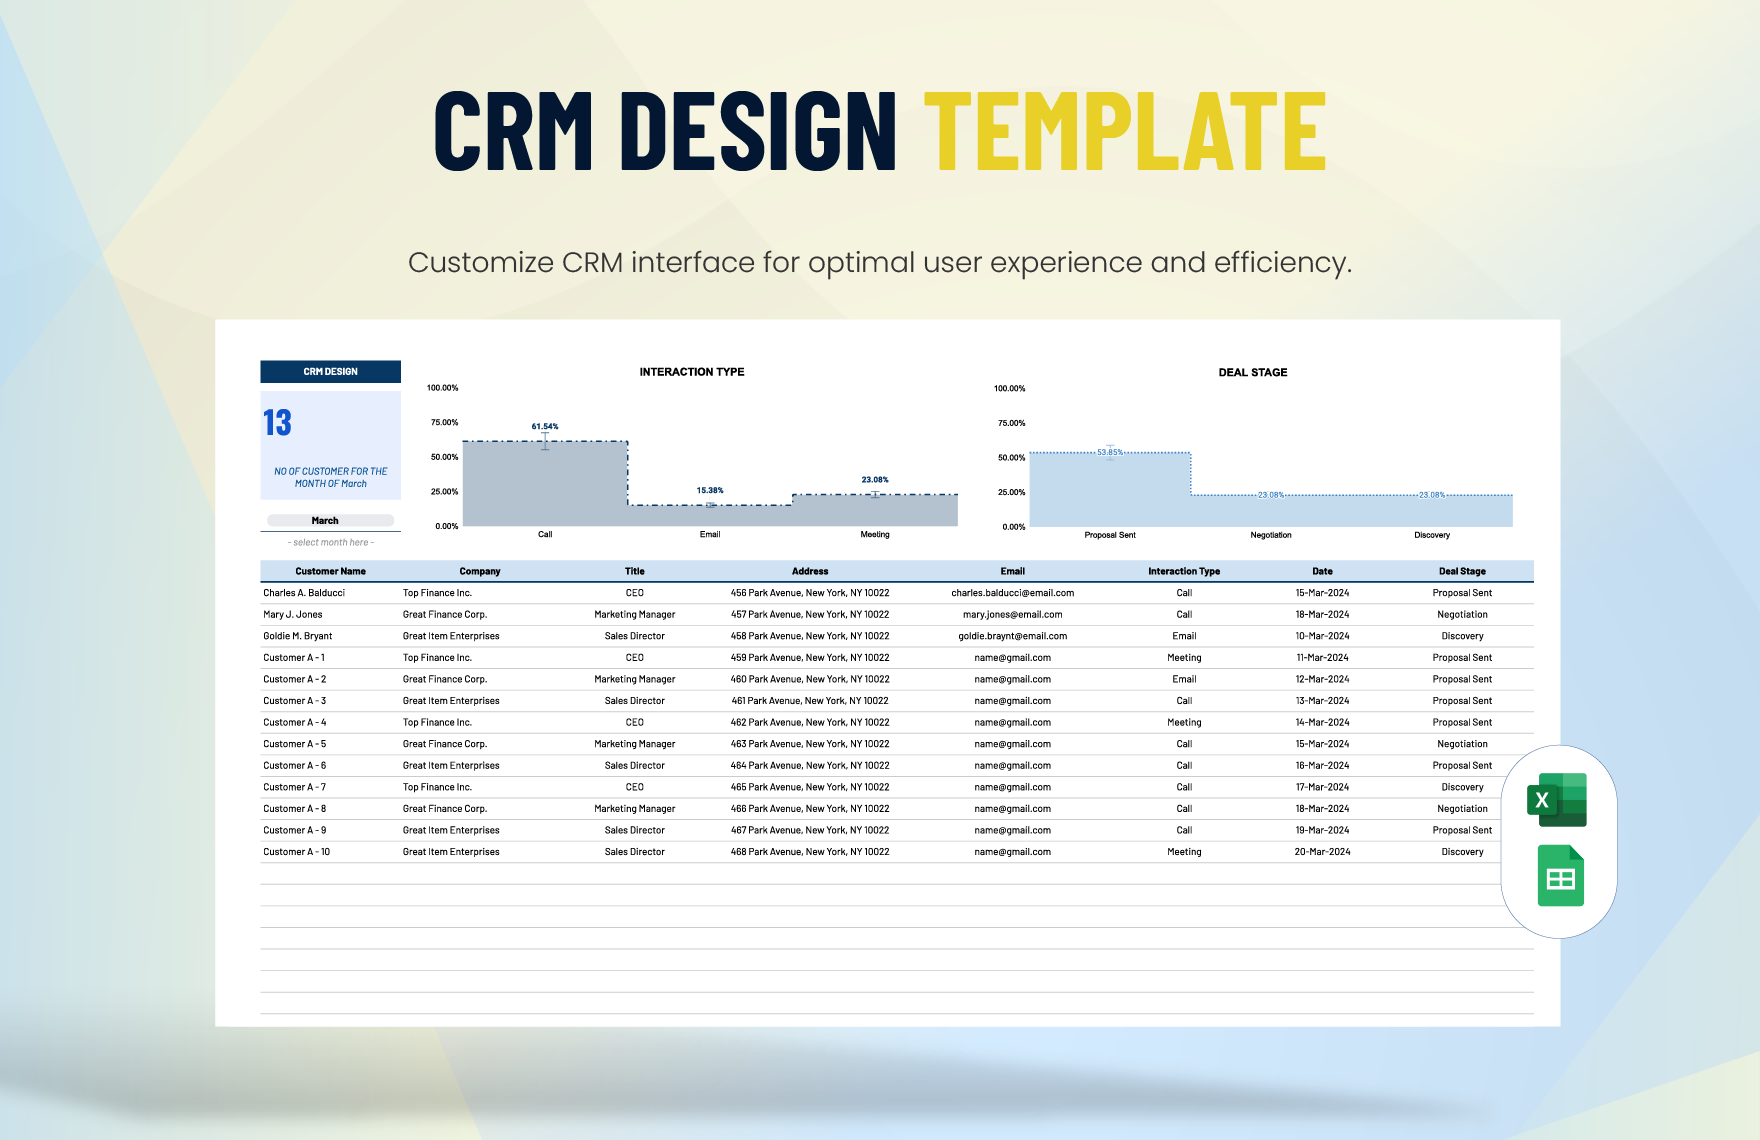 CRM Design Template in Excel, Google Sheets